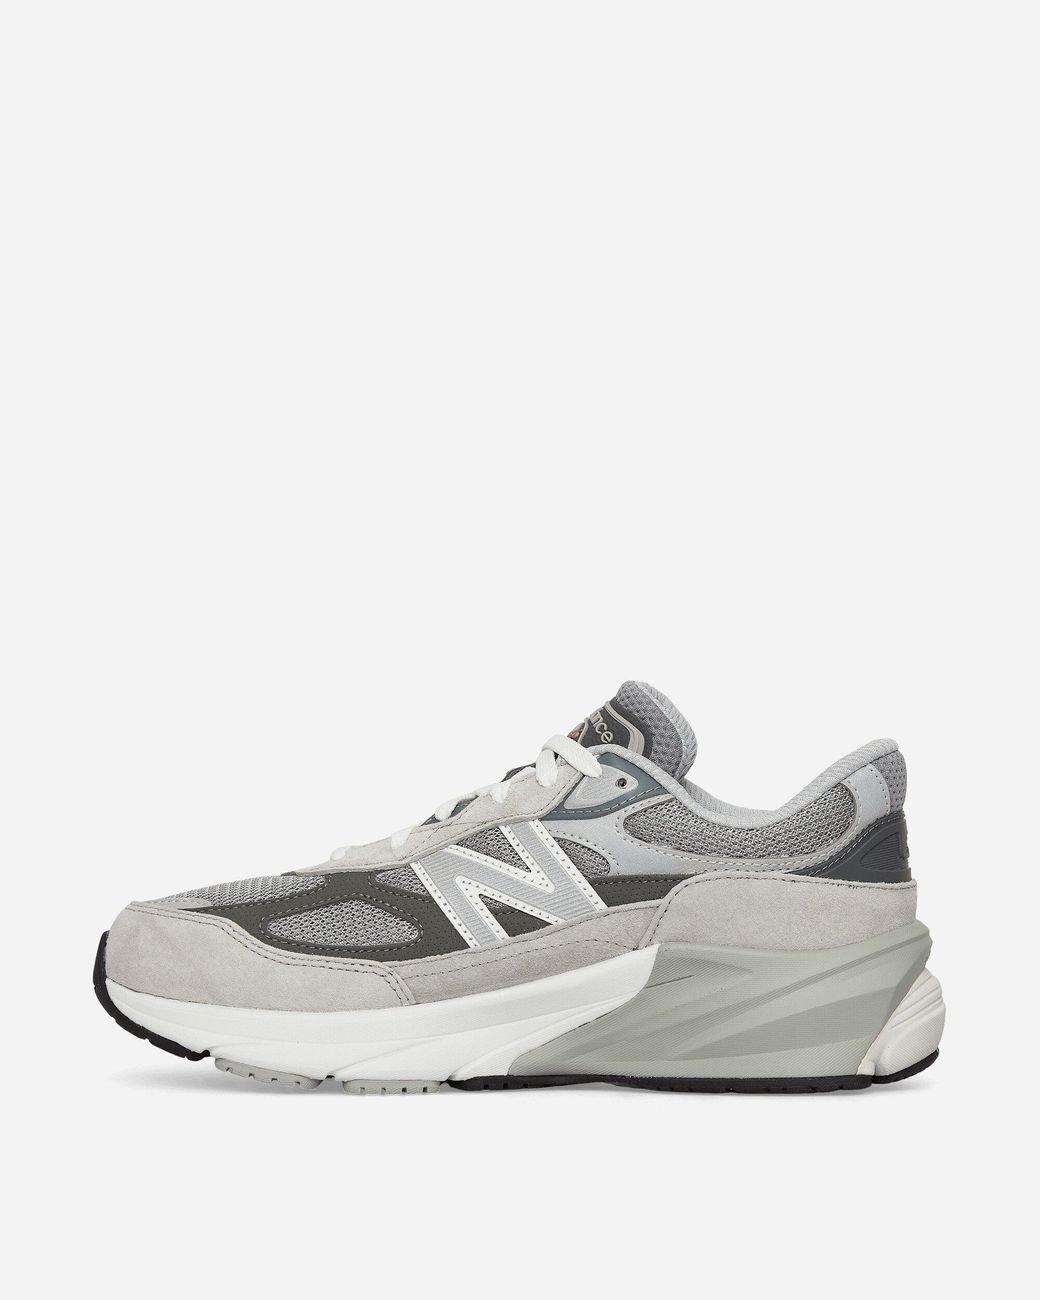 New Balance 990v6 (gs) Sneakers in White | Lyst